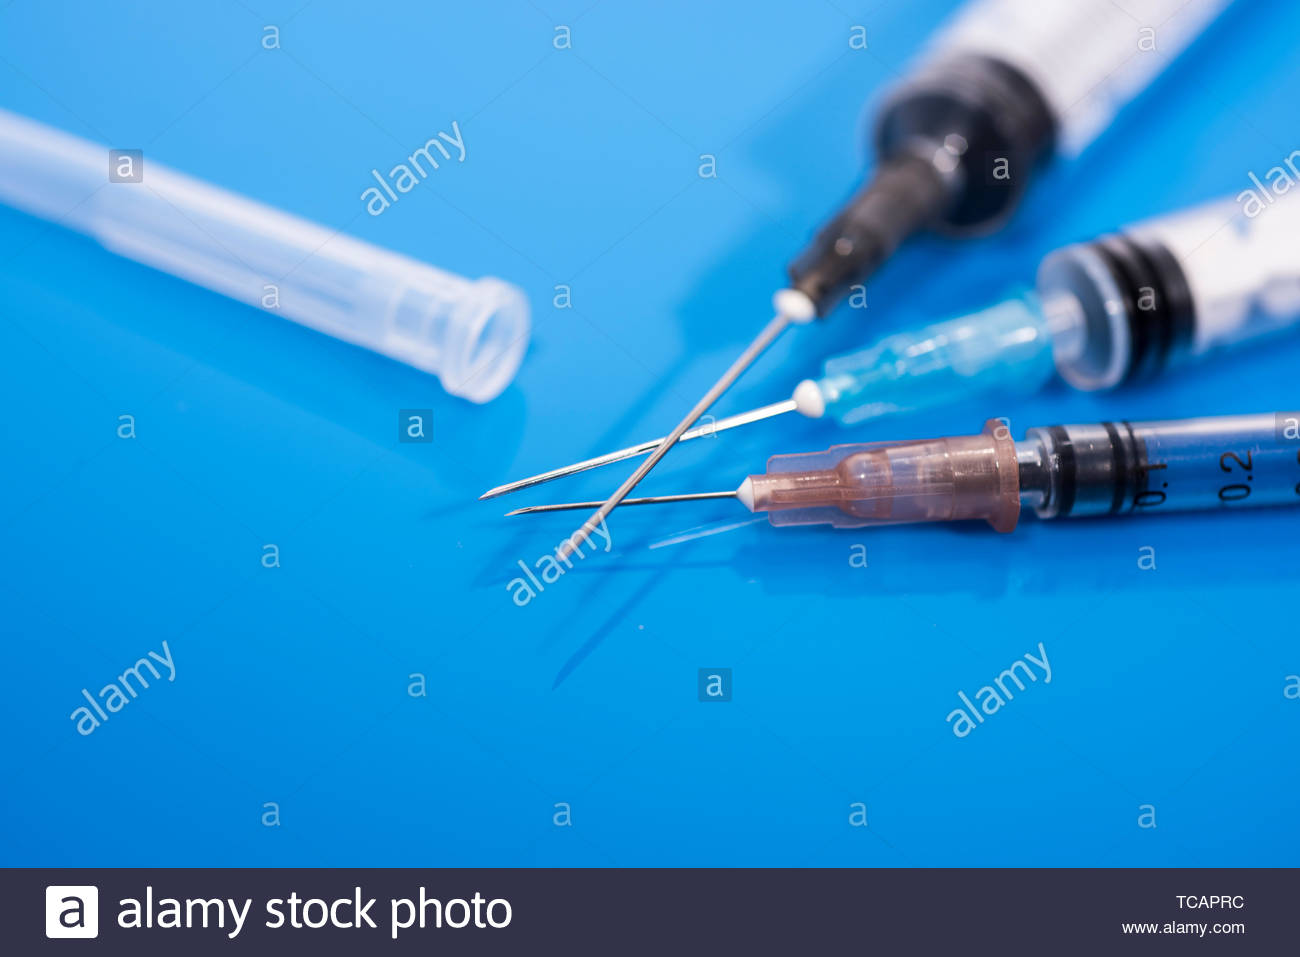 Vaccination Time Vaccine In Vial With Syringe On Clock Background